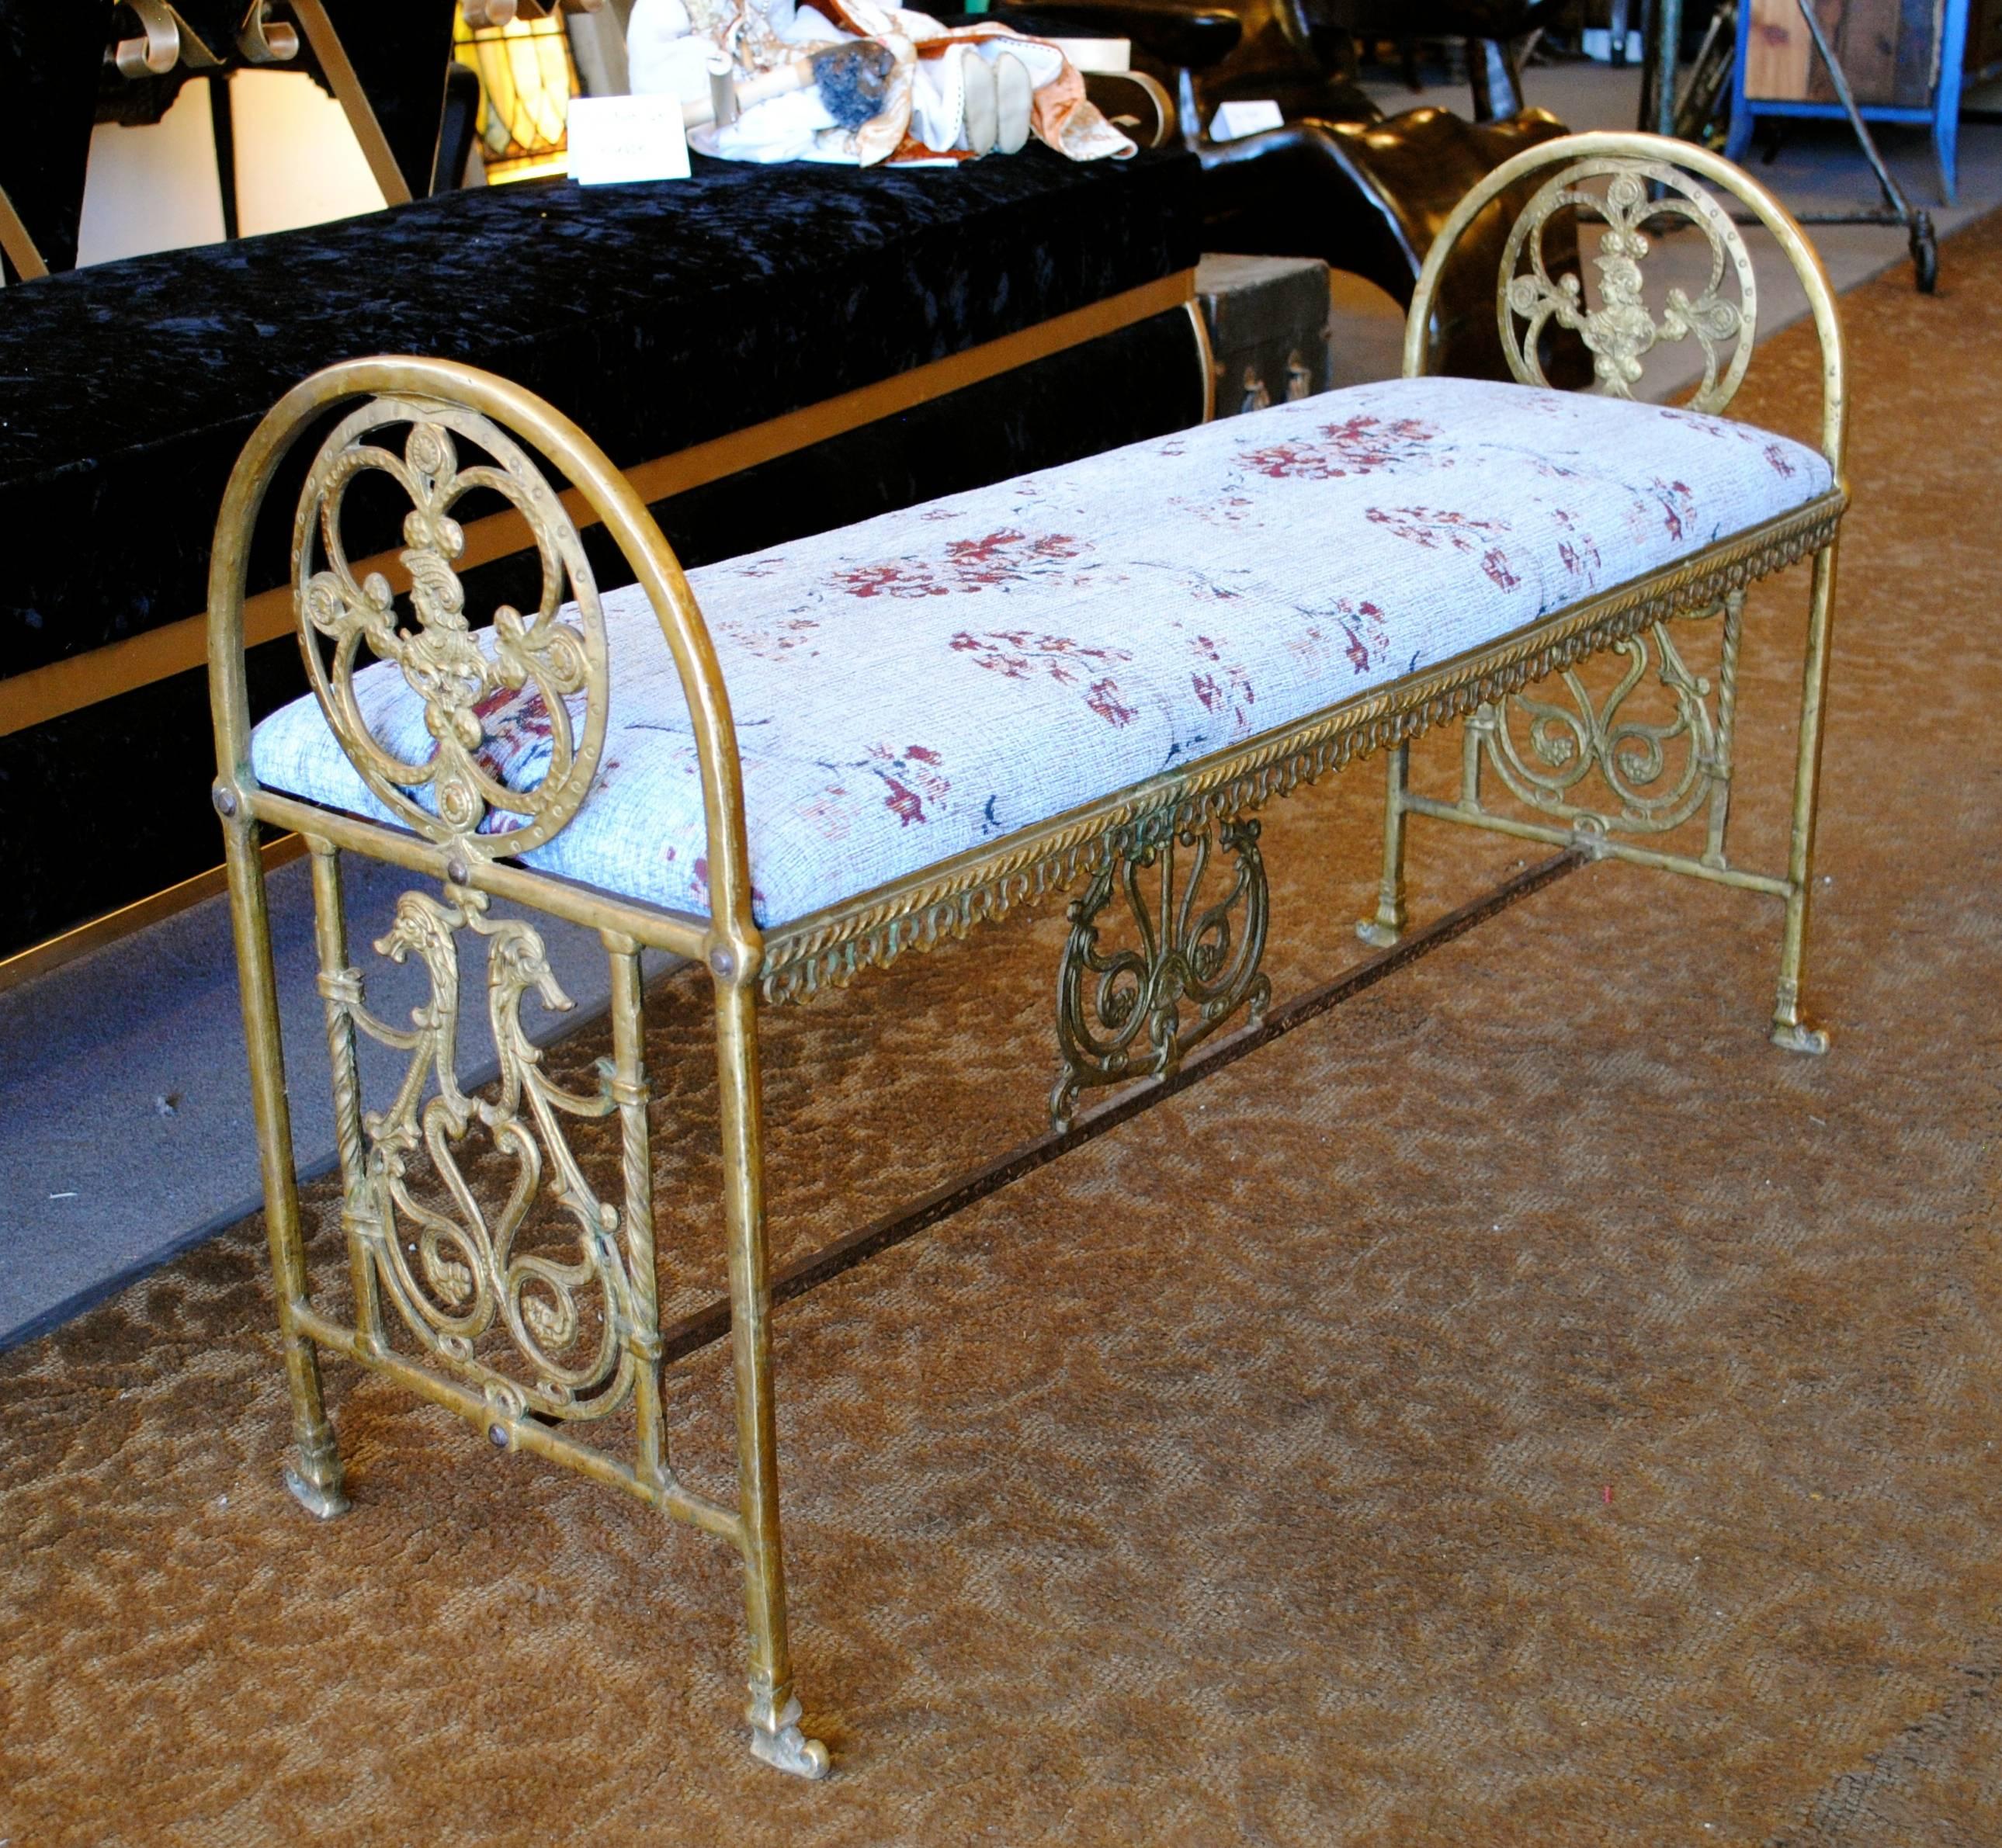 19th century brass bench in period upholstery.